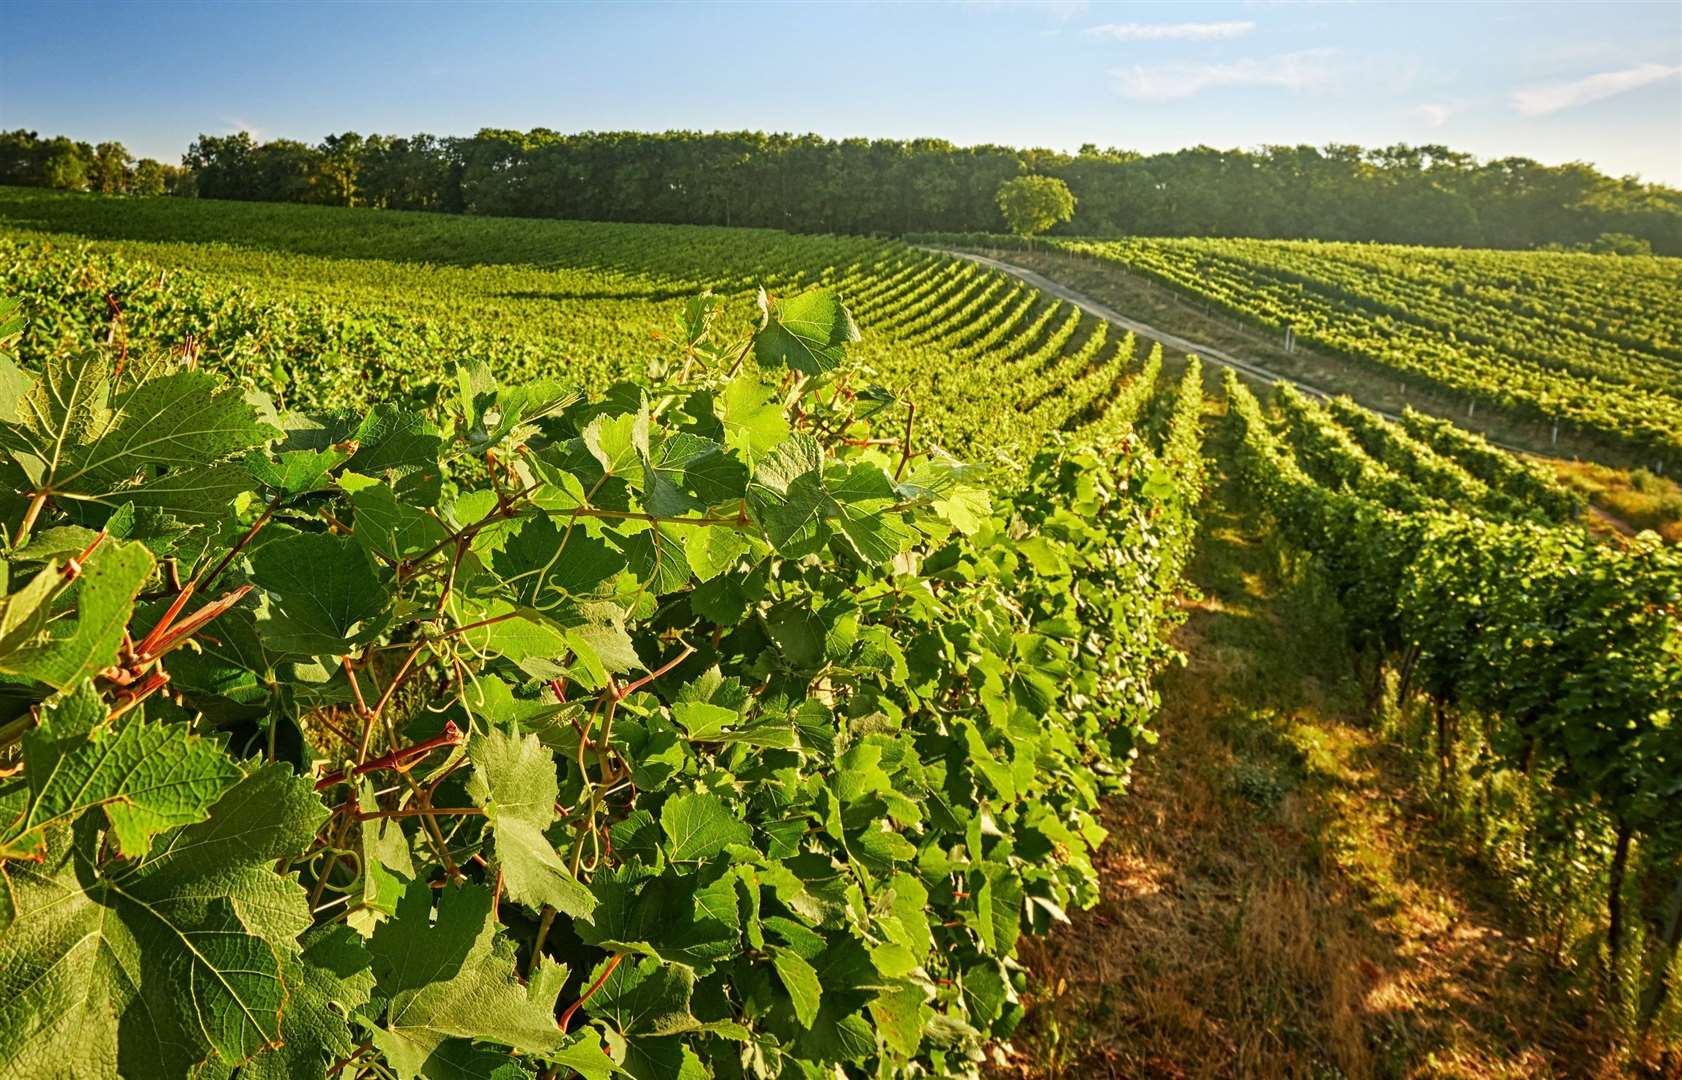 A vineyard was one of those businesses to receive funding